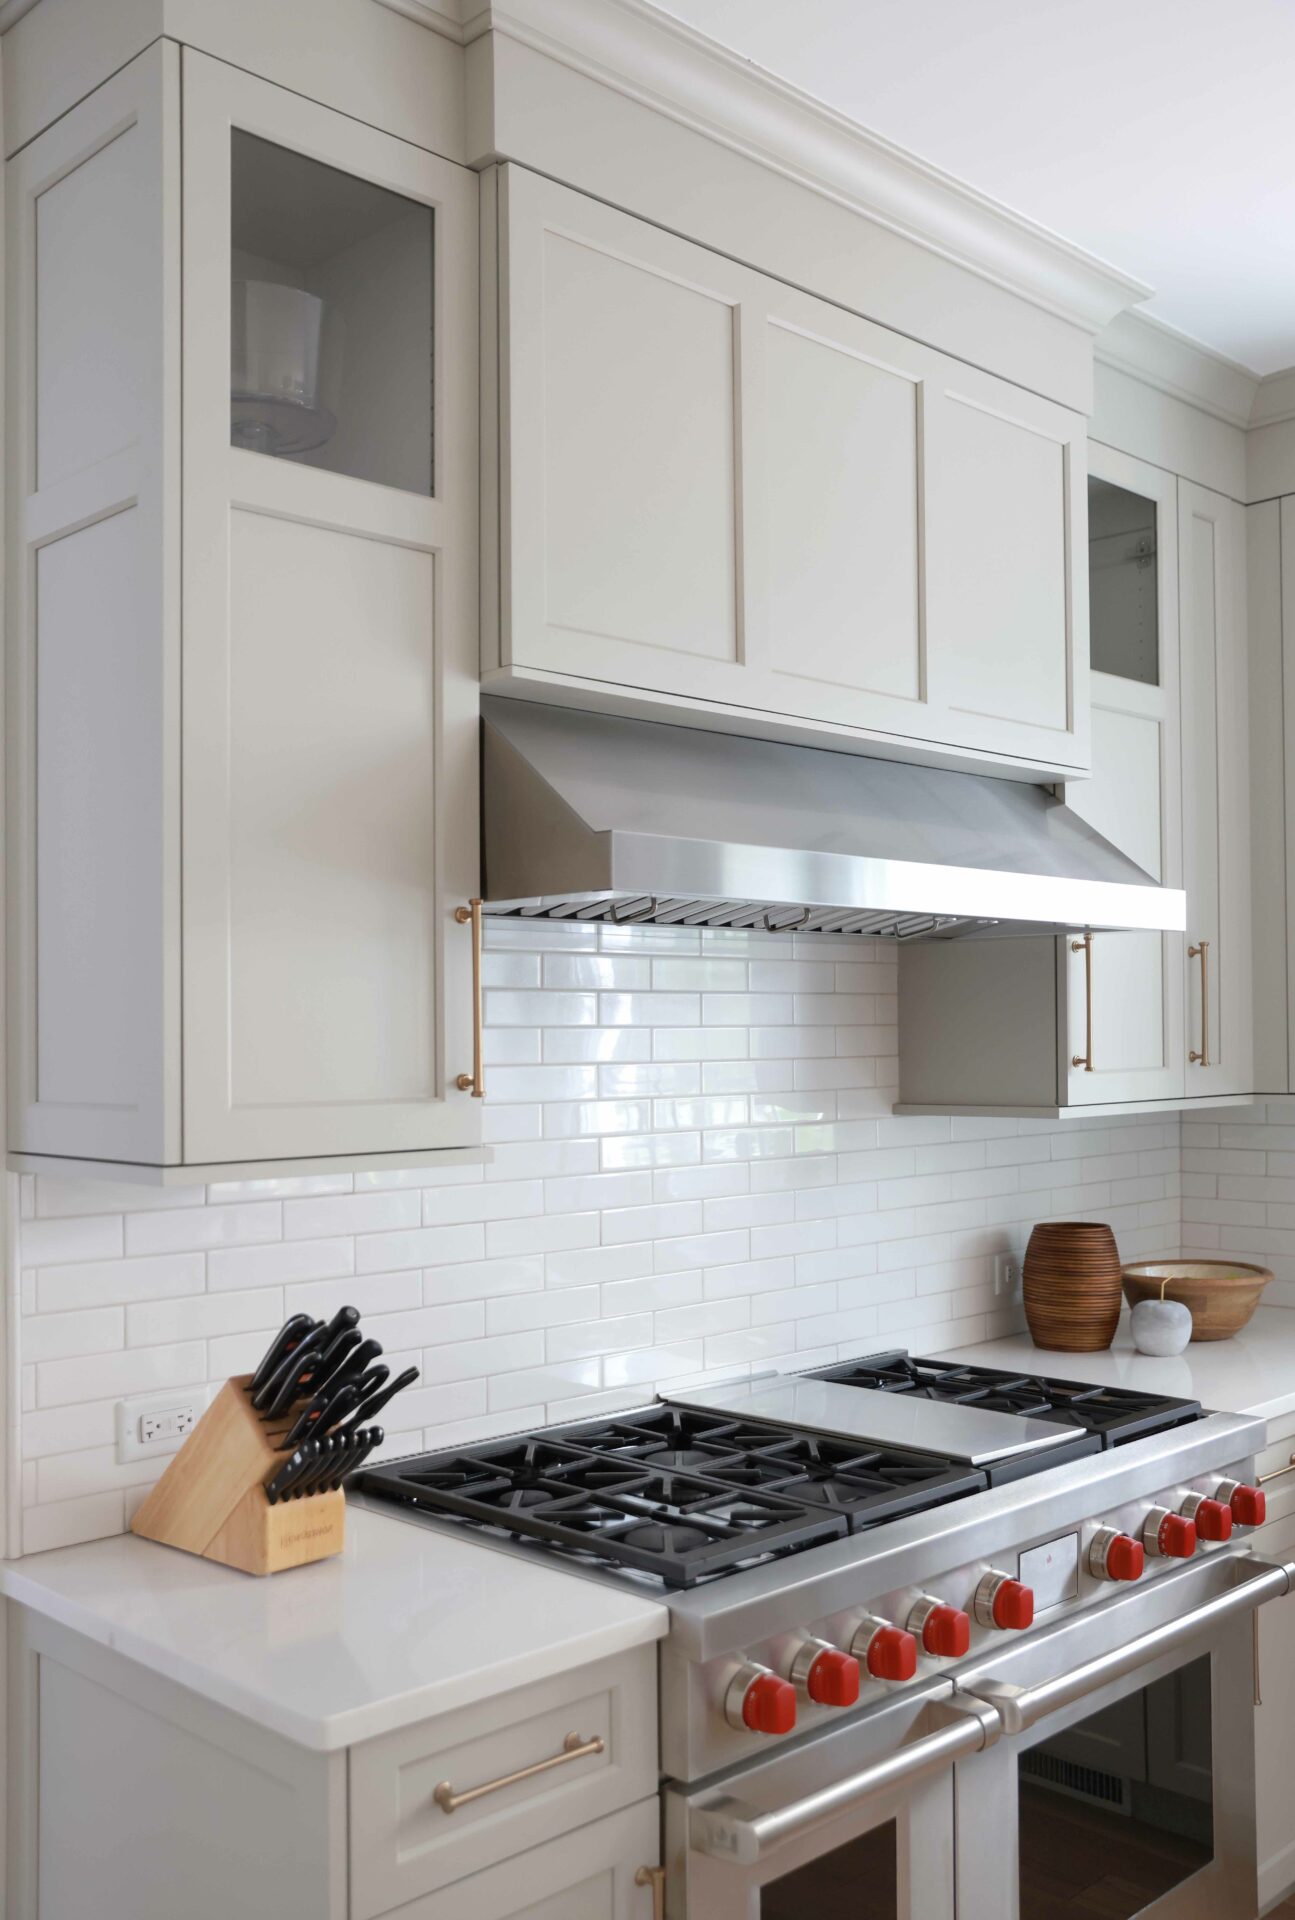 Warm white kitchen cabinets with a stainless steel hood